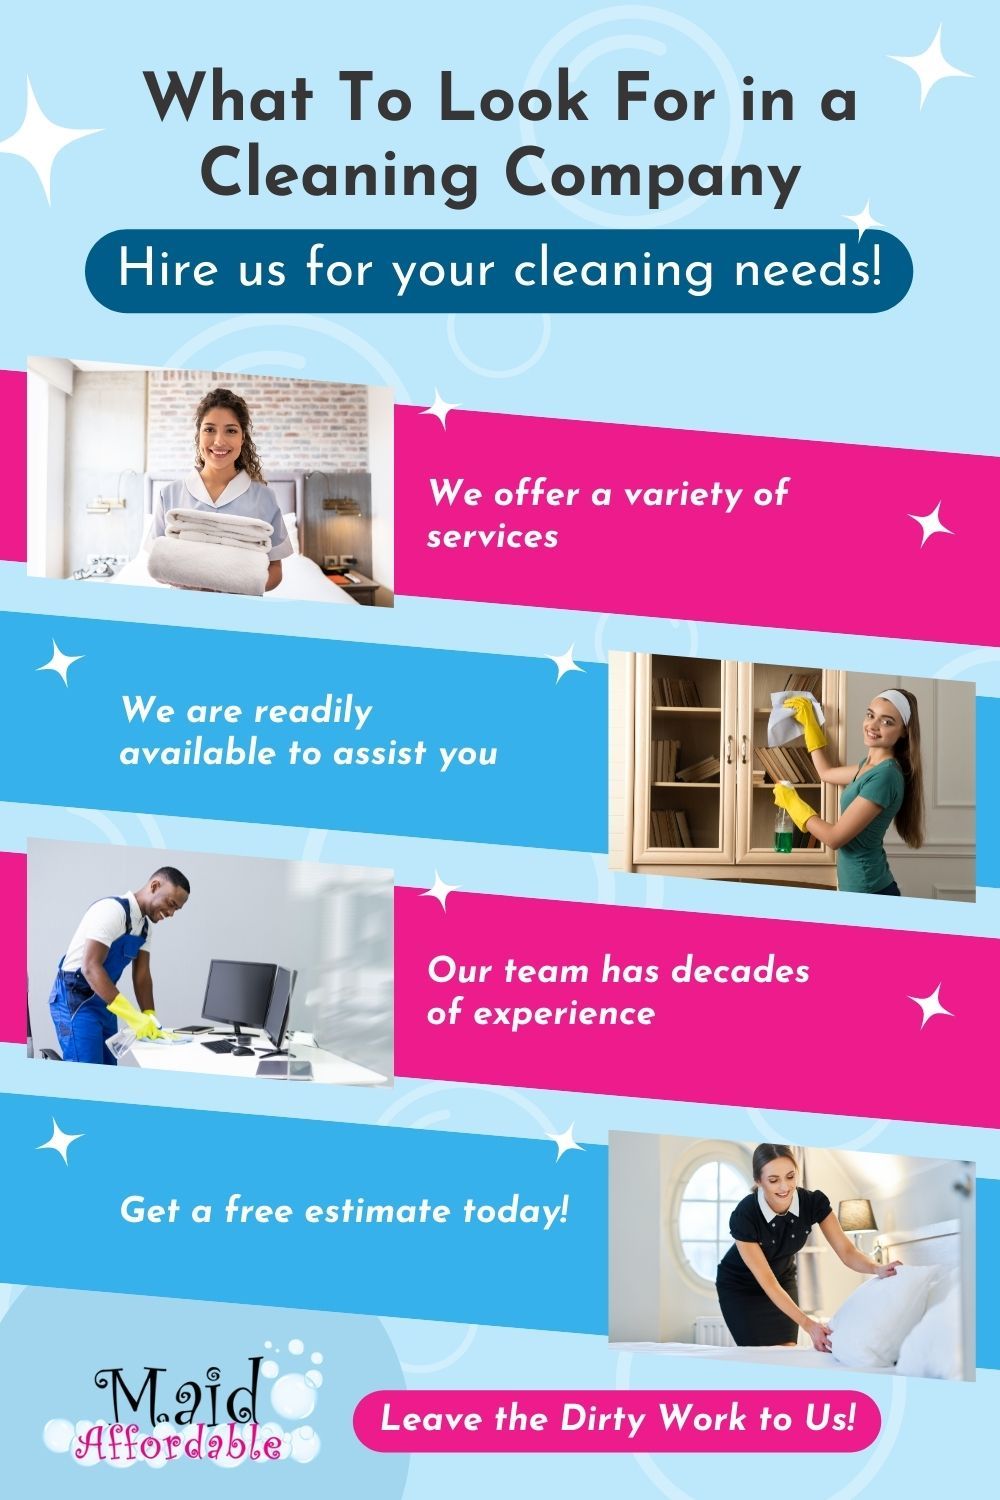  Infographic - What To Look For in a Cleaning Company.jpg